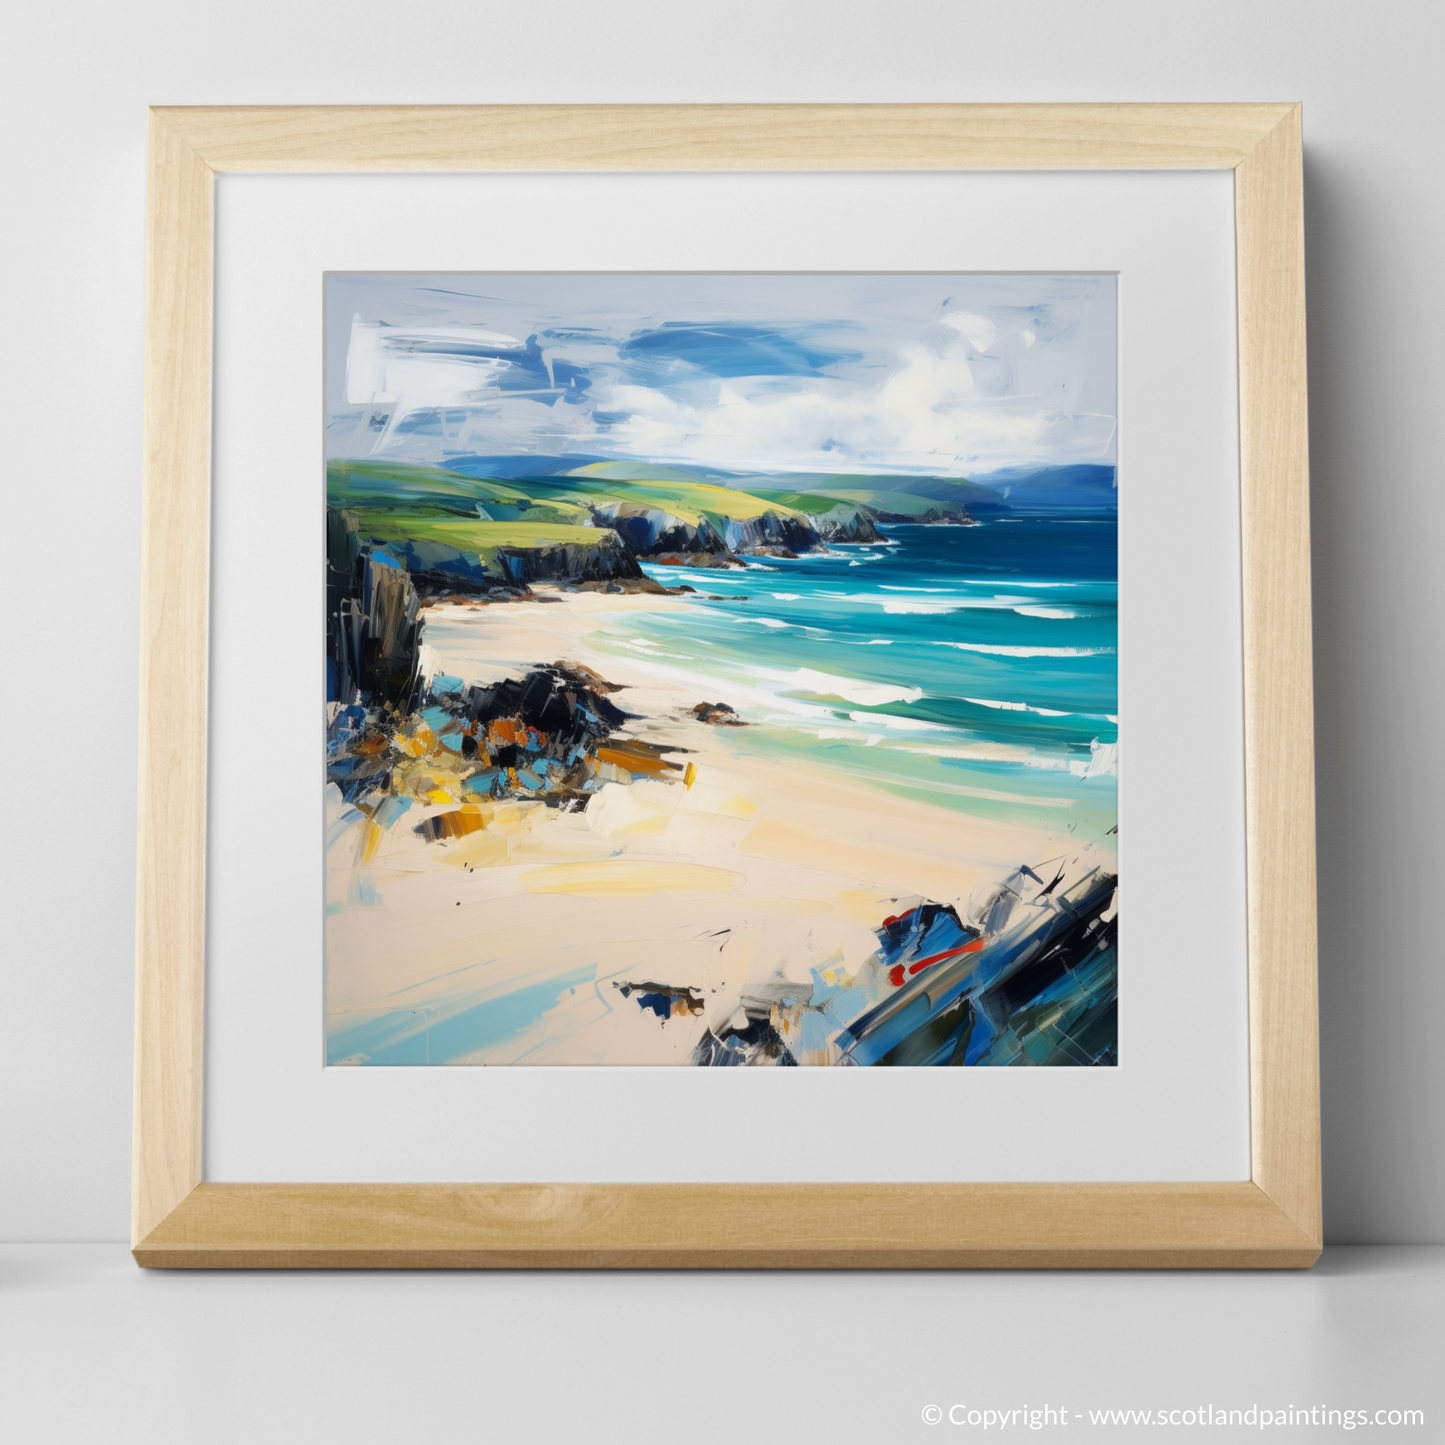 Art Print of Durness Beach, Sutherland with a natural frame